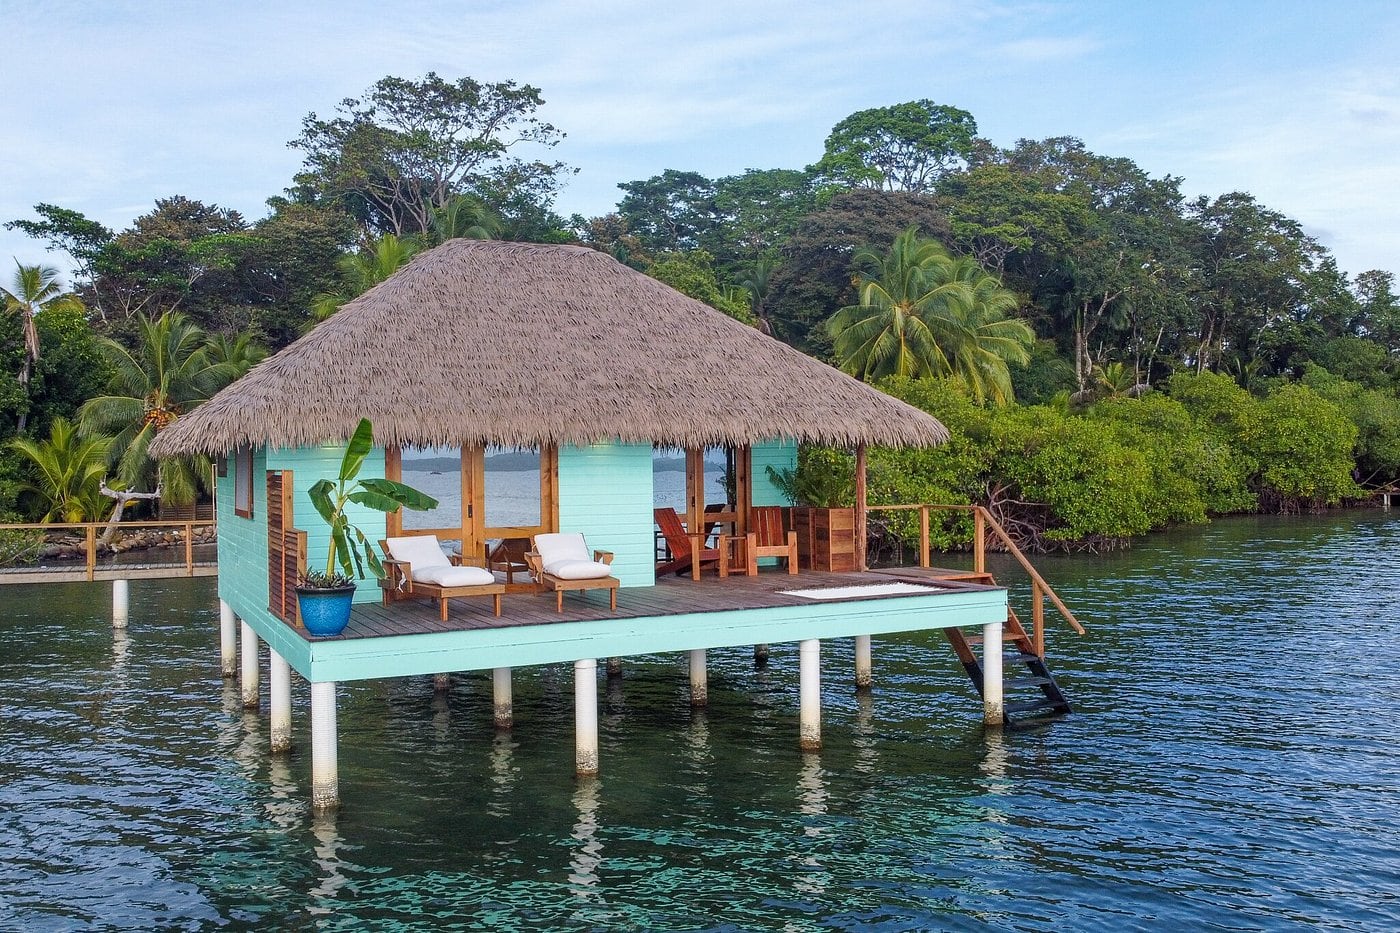 Panama water villa with thatch roof in mangrove